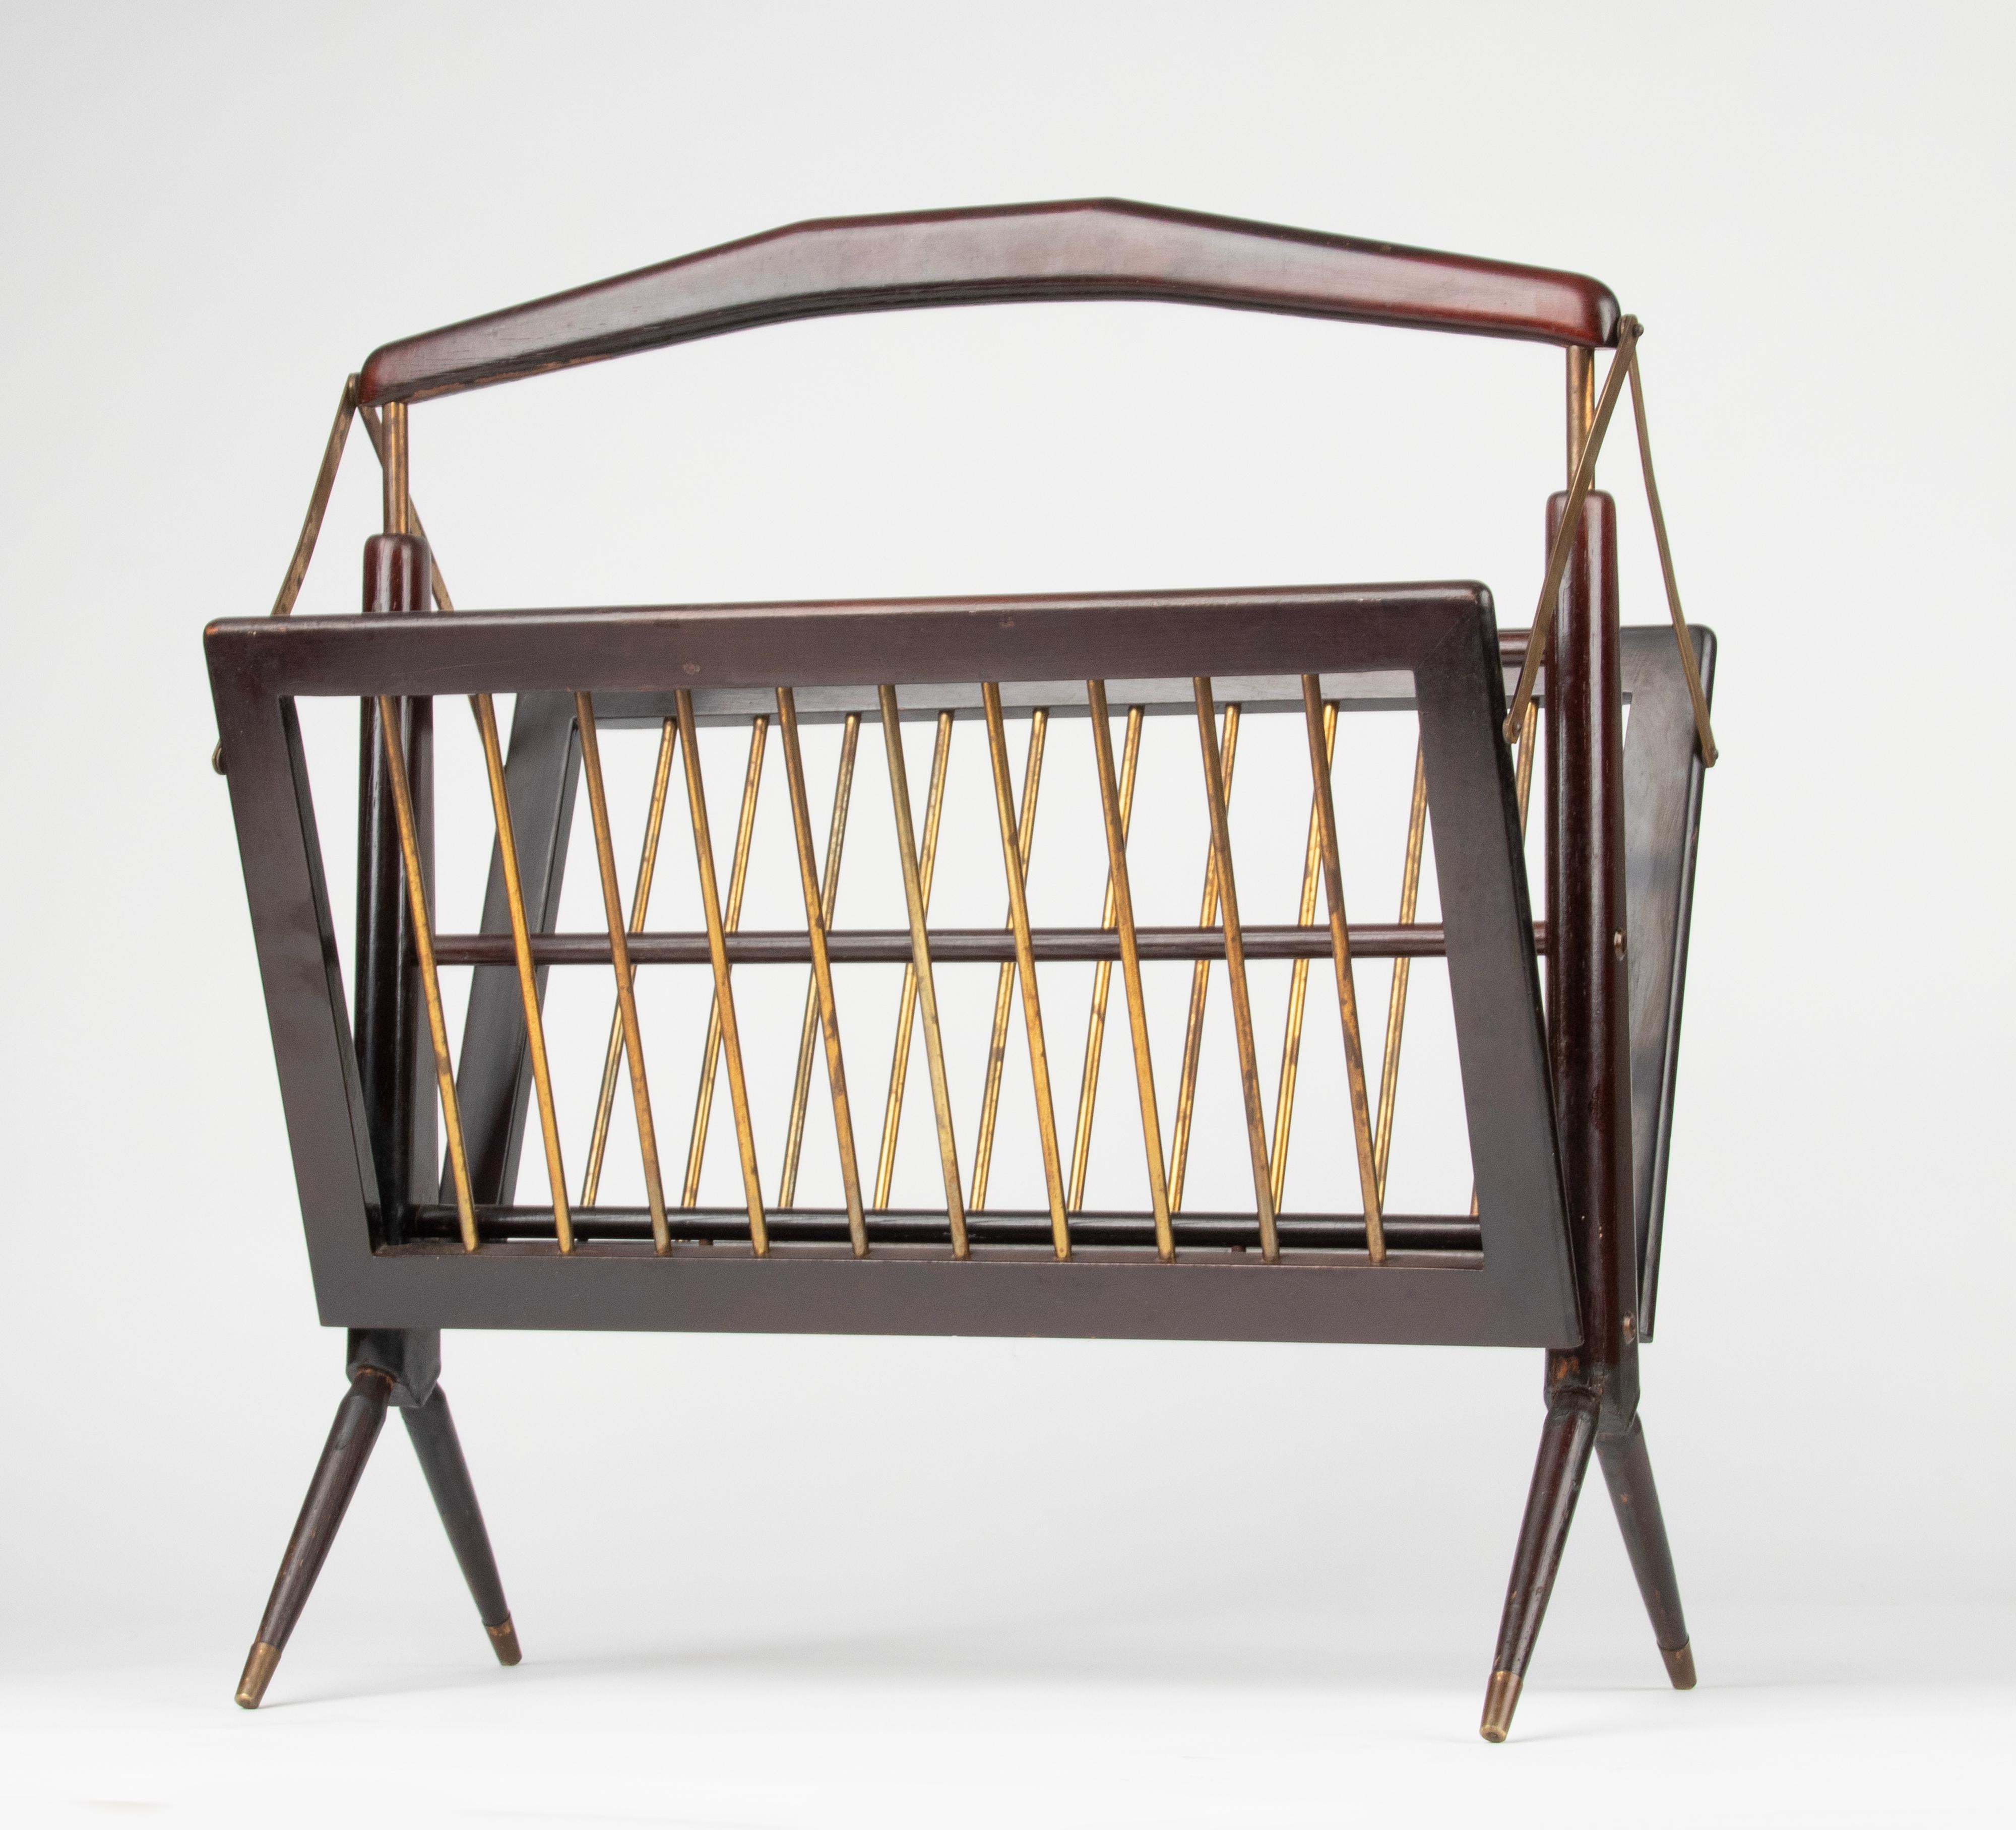 Wonderful magazine rack by Cesare Lacca. It is made of deep red lacquered beech wood with copper colour metal rods. Produced in Milan, Italy, during 1950s. It is both elegant and functional, as wood and copper colour are perfectly mixed and it can